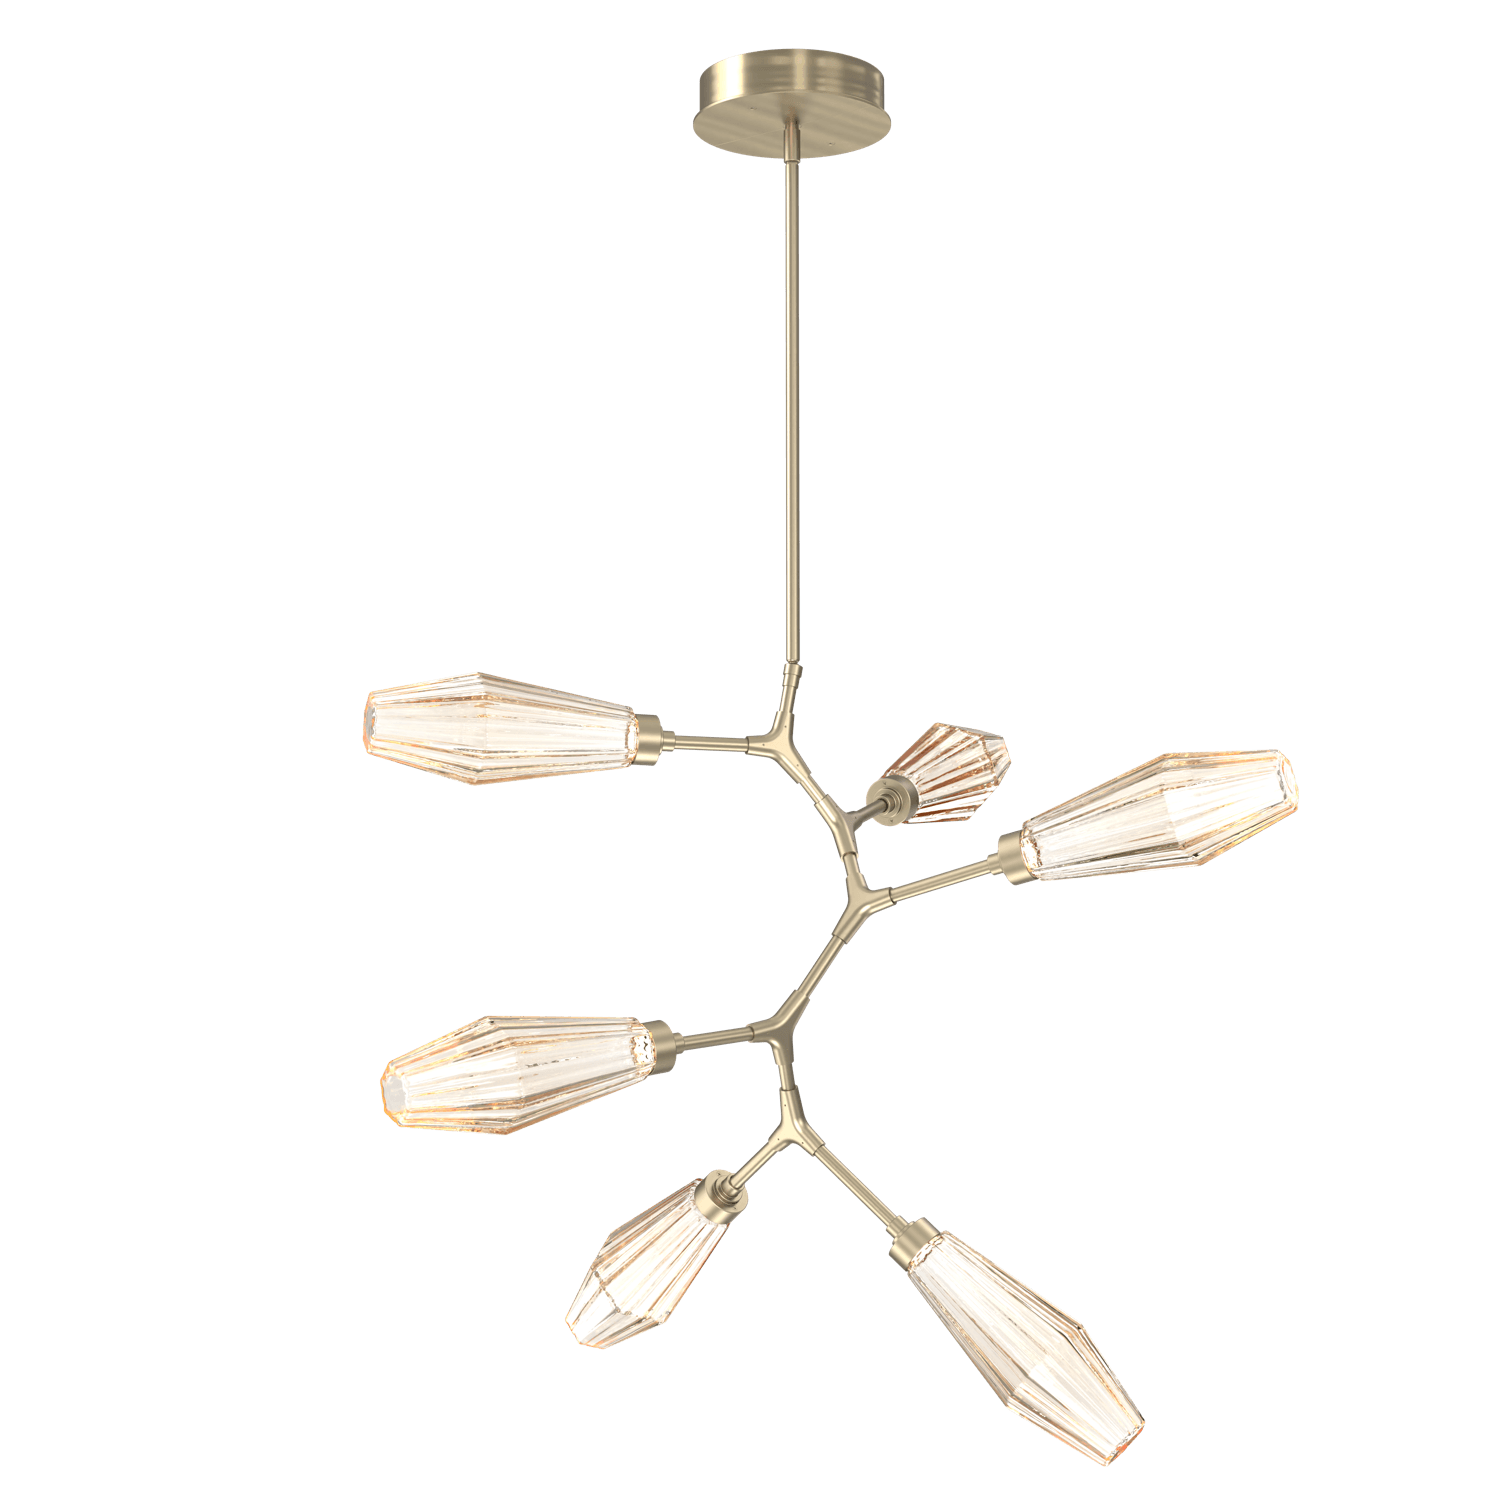 CHB0049-VA-HB-RA-Hammerton-Studio-Aalto-6-light-modern-vine-chandelier-with-heritage-brass-finish-and-optic-ribbed-amber-glass-shades-and-LED-lamping